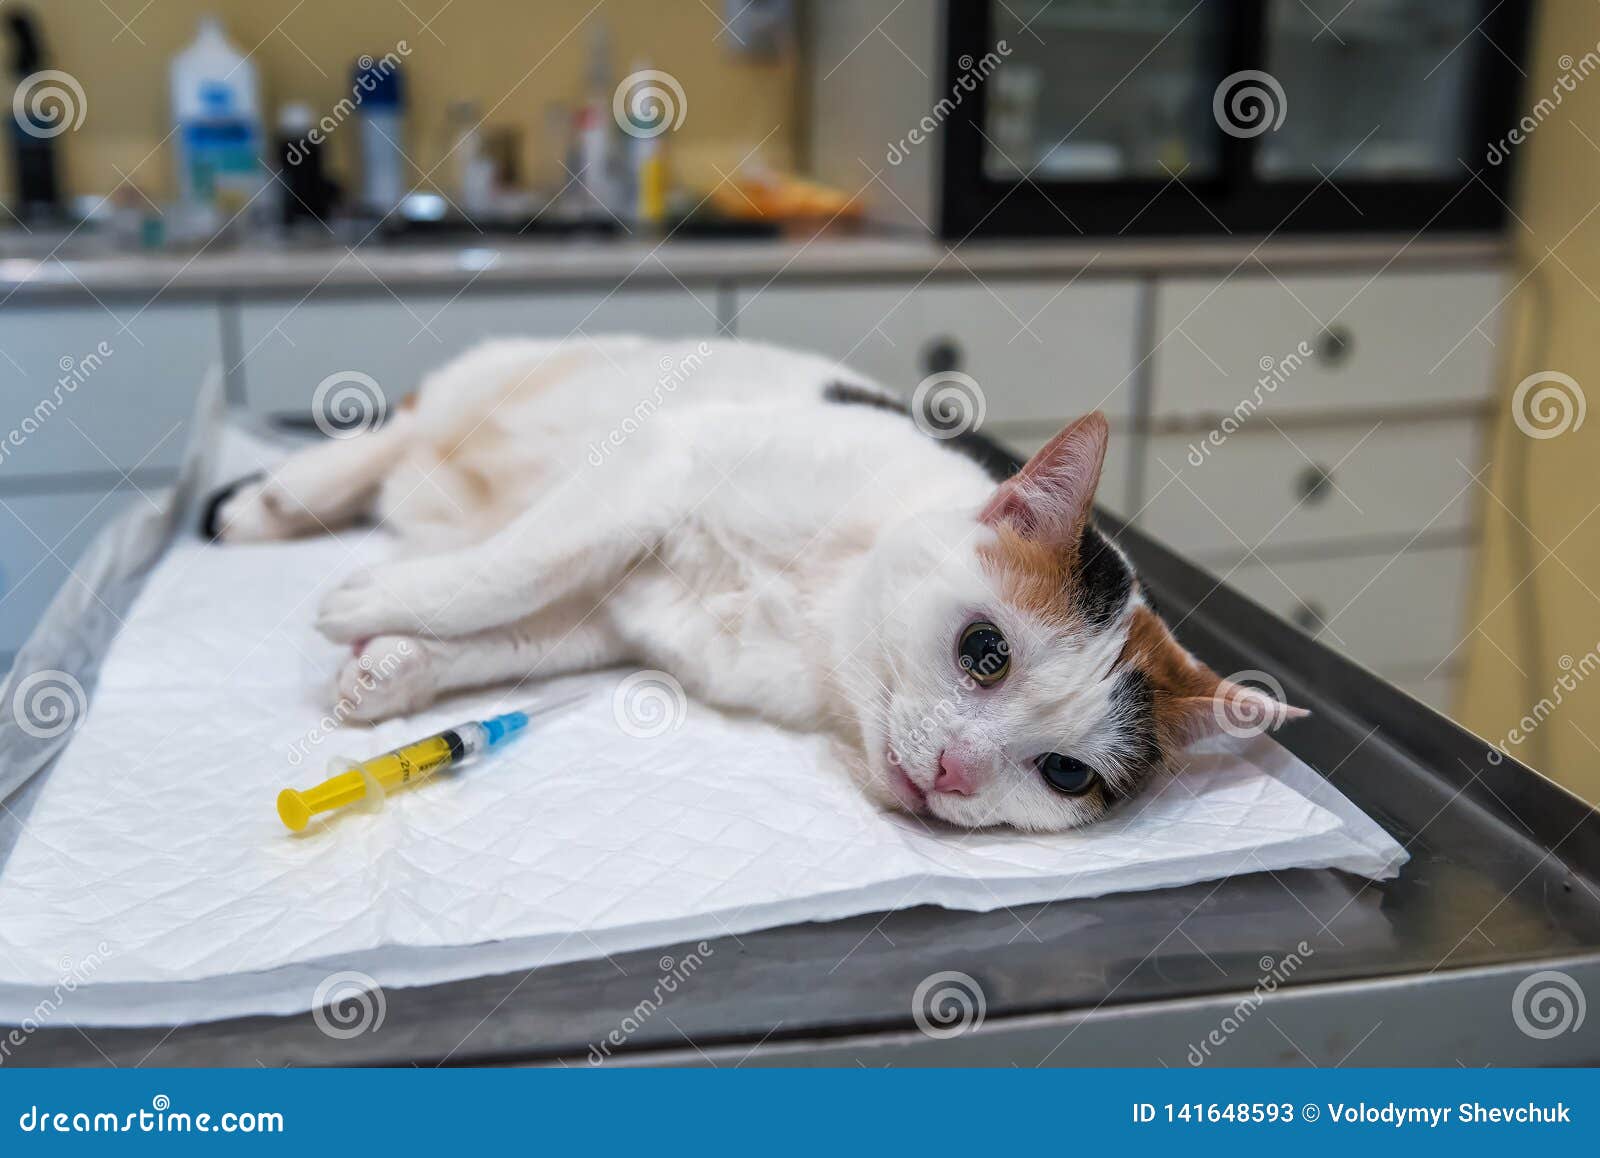 Cat Under Anesthesia Before Surgery Stock Image Image of occupation